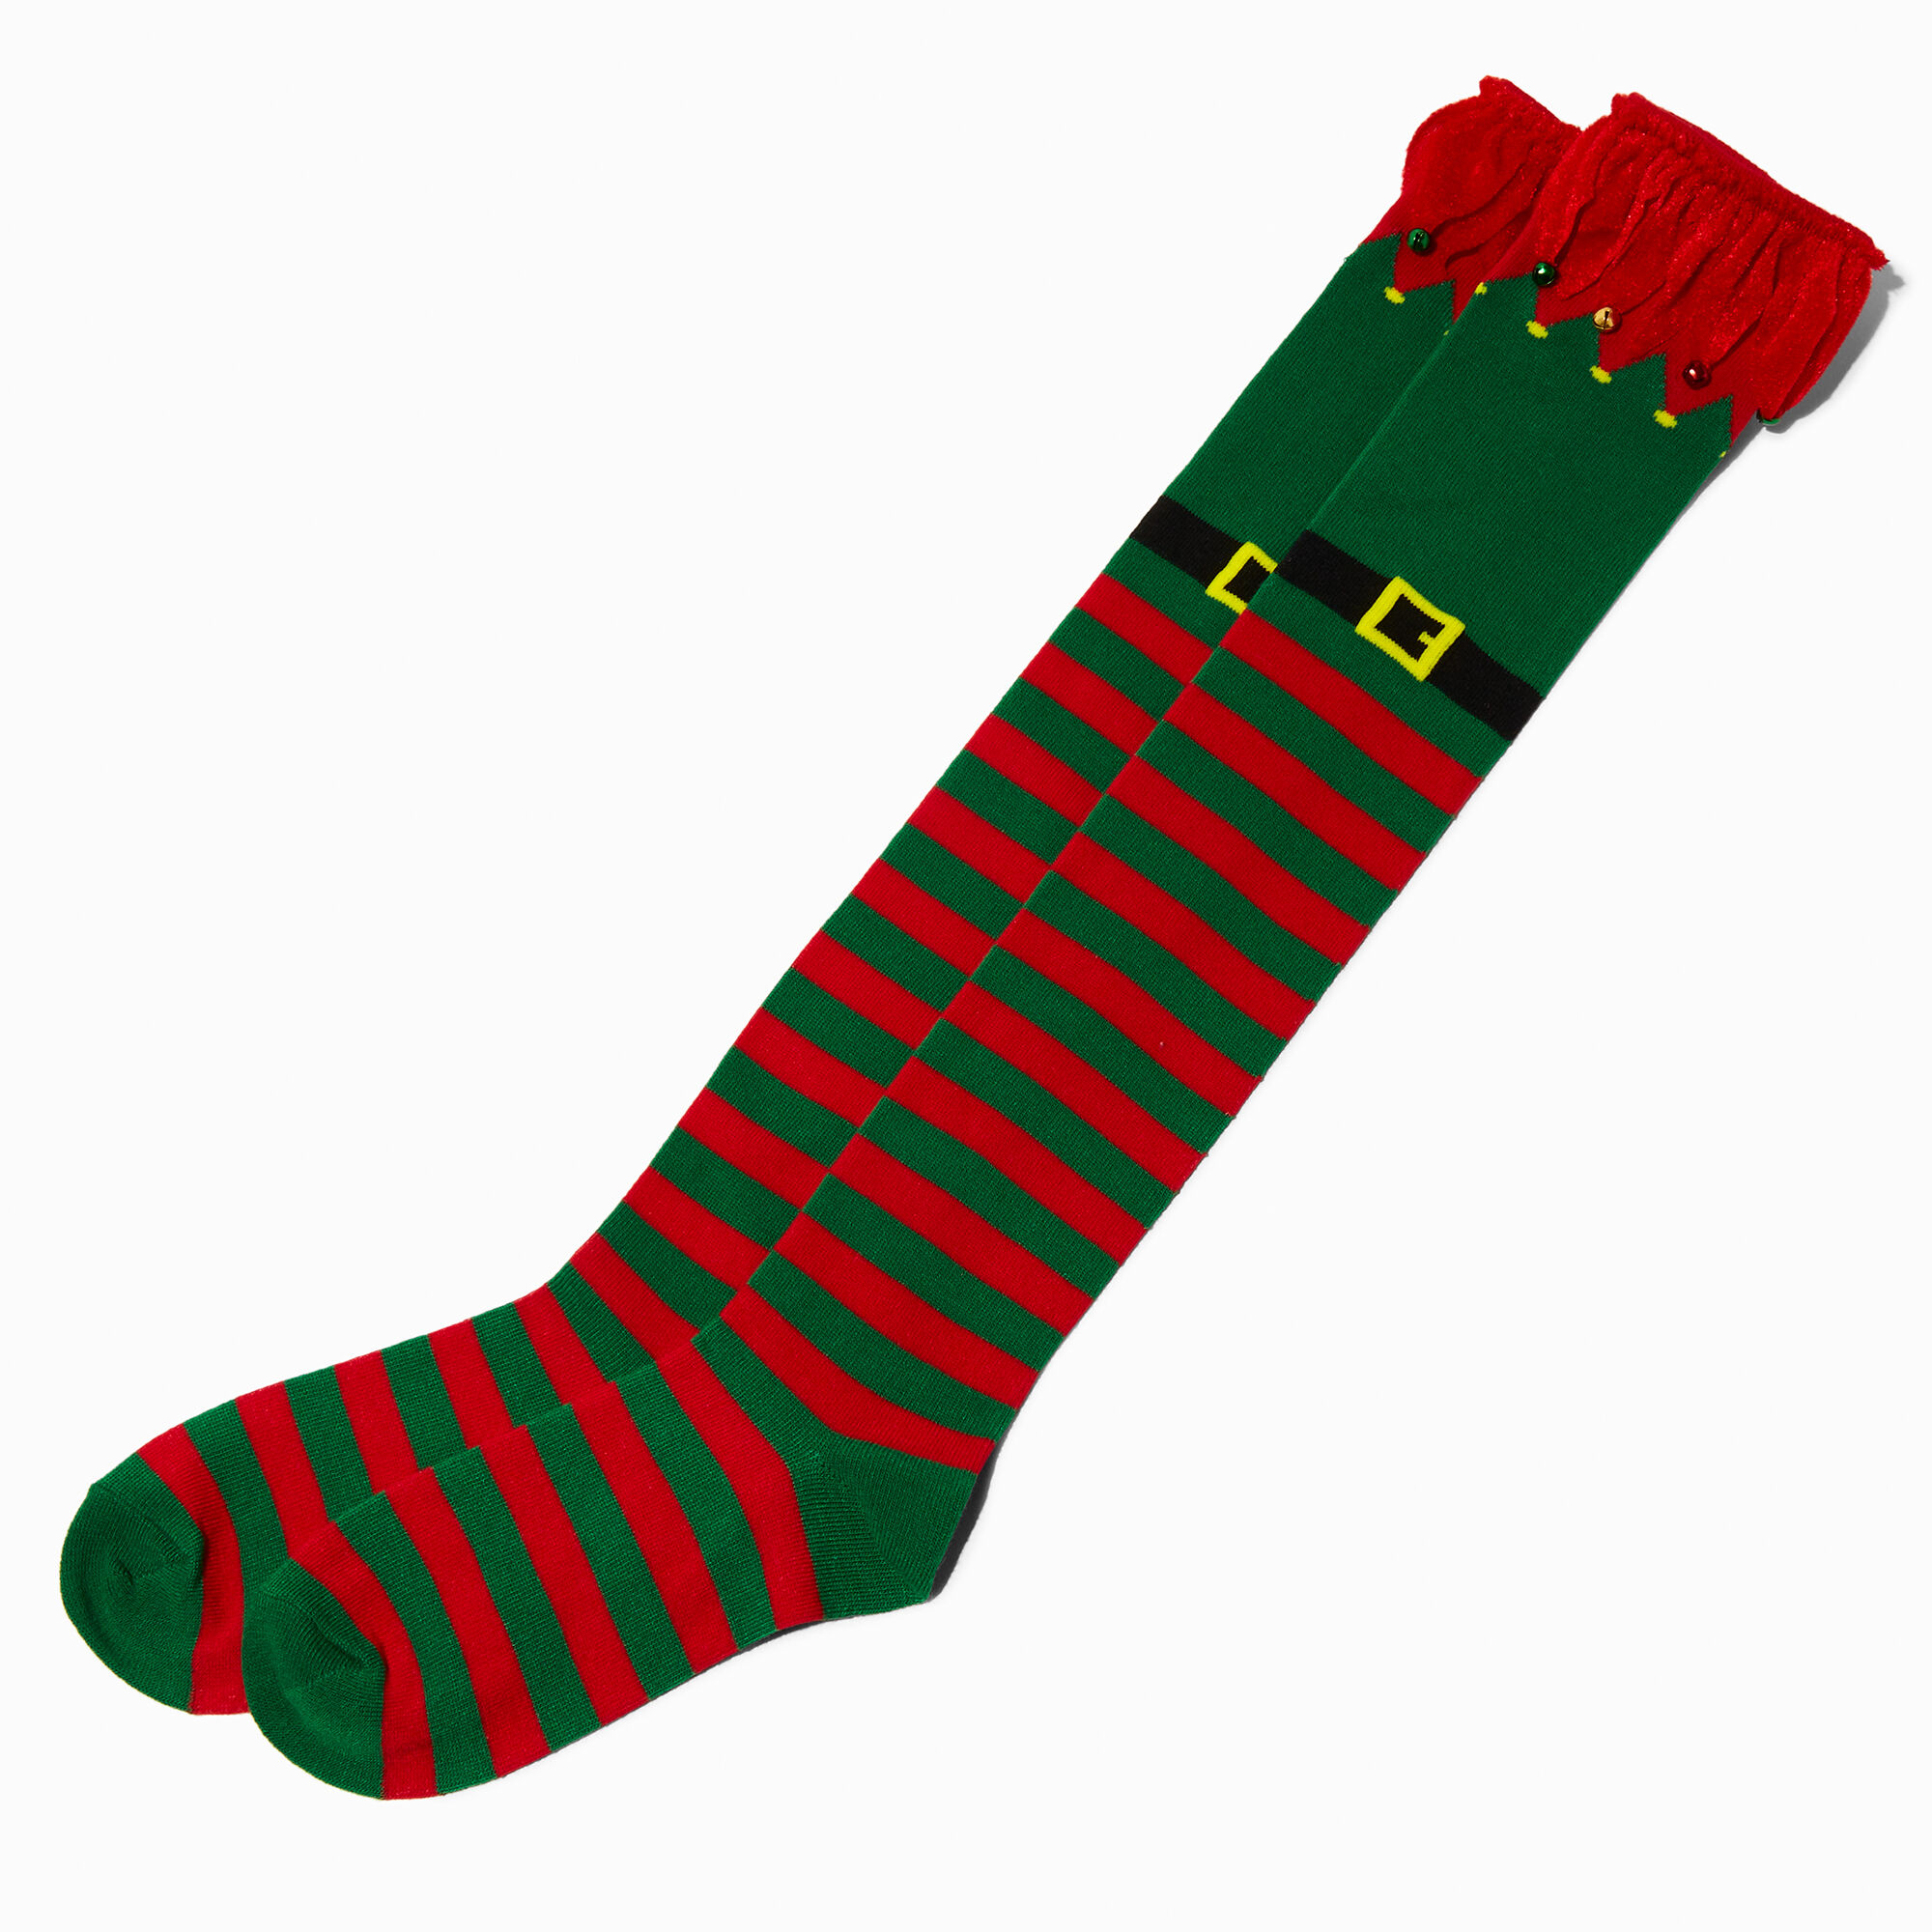 View Claires Christmas Elf Over The Knee Socks information